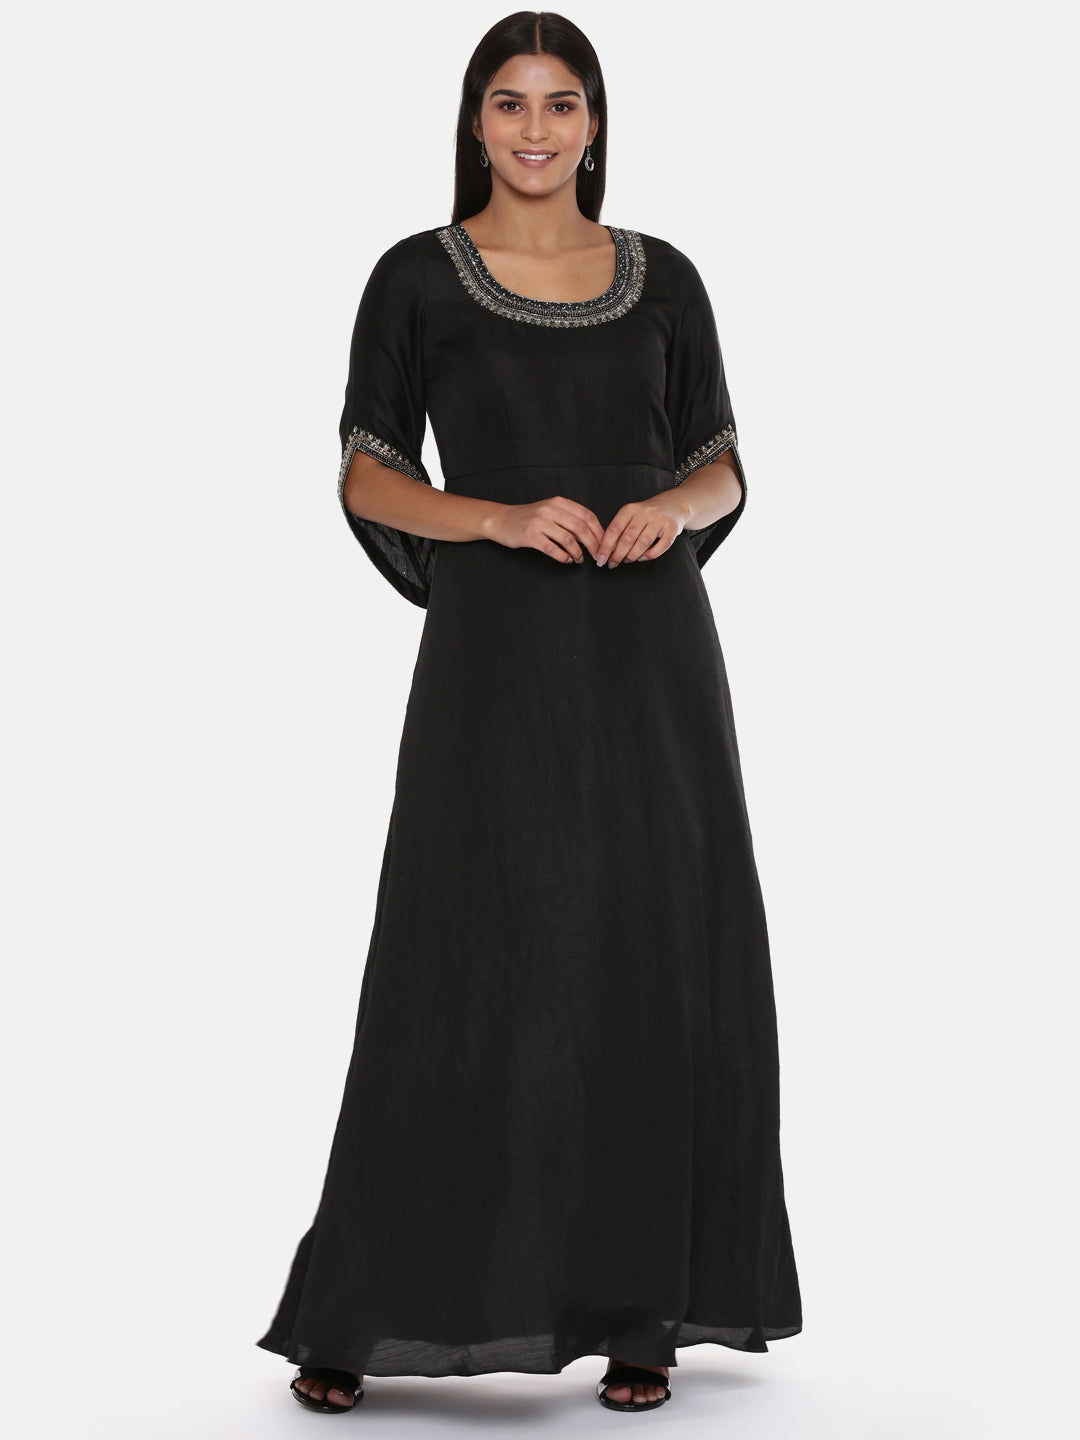 Buy Black Silk Gown Online In India - Etsy India